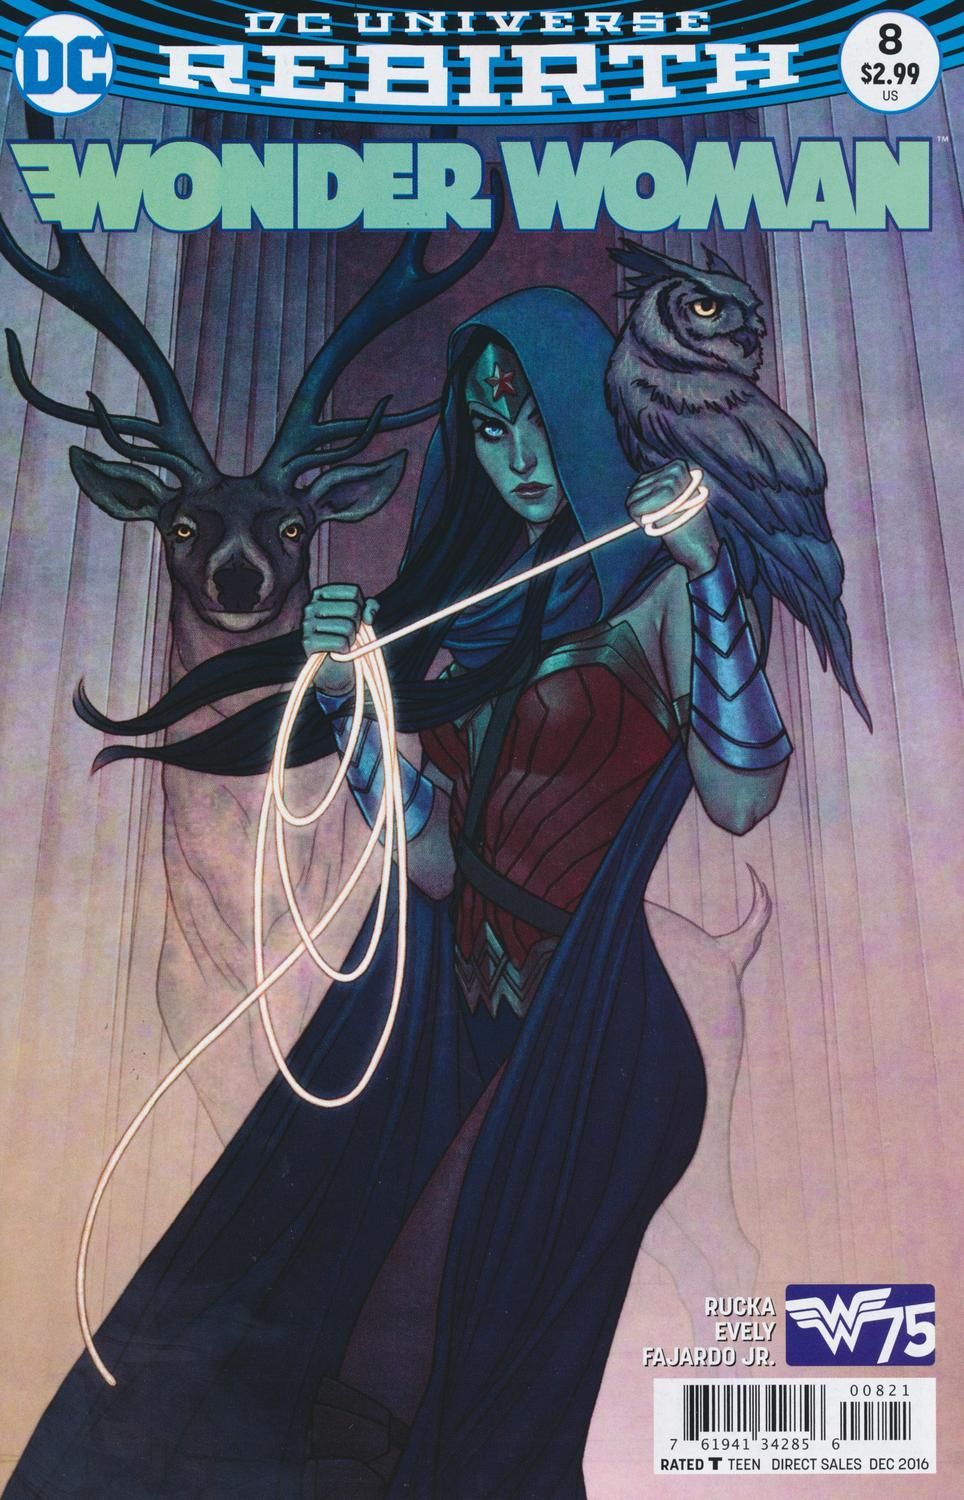 Wonder Woman #8 variant cover by Jenny Frison.